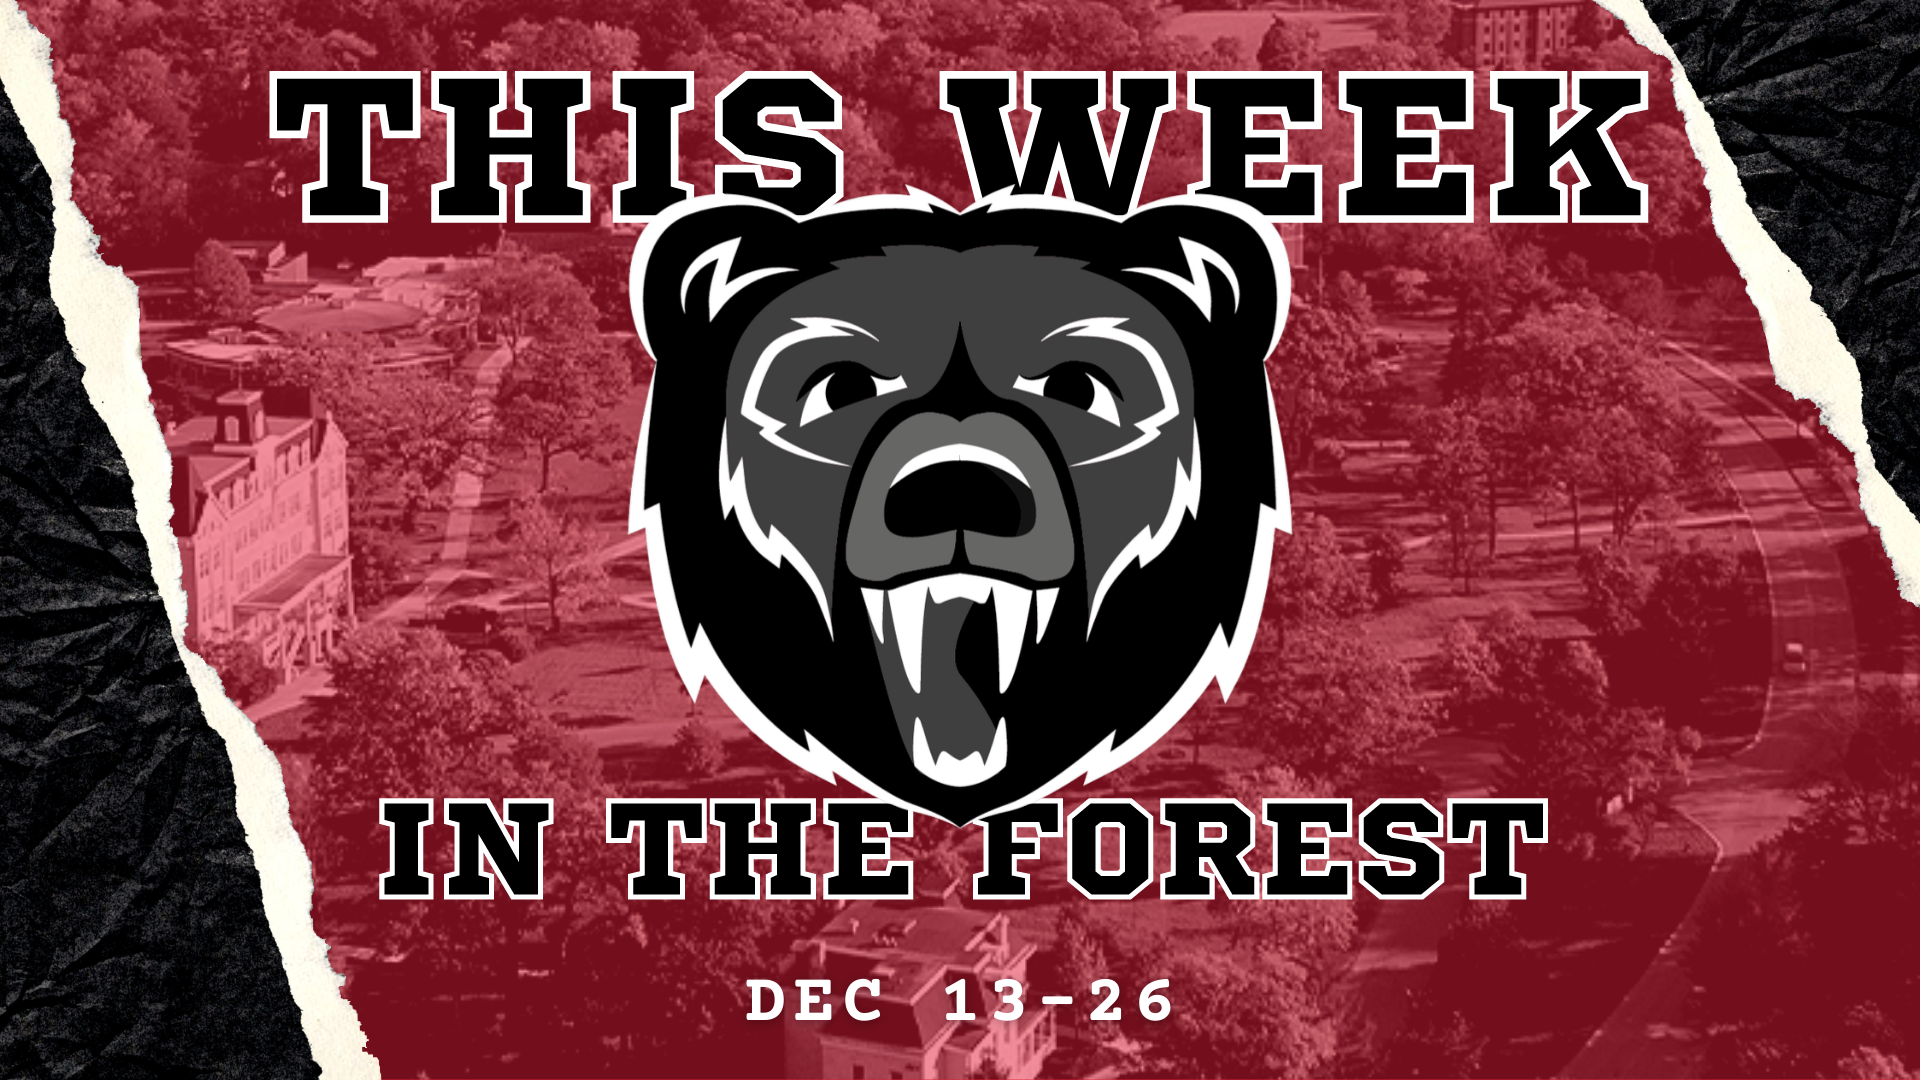 Two Weeks in the Forest: Dec. 13-26